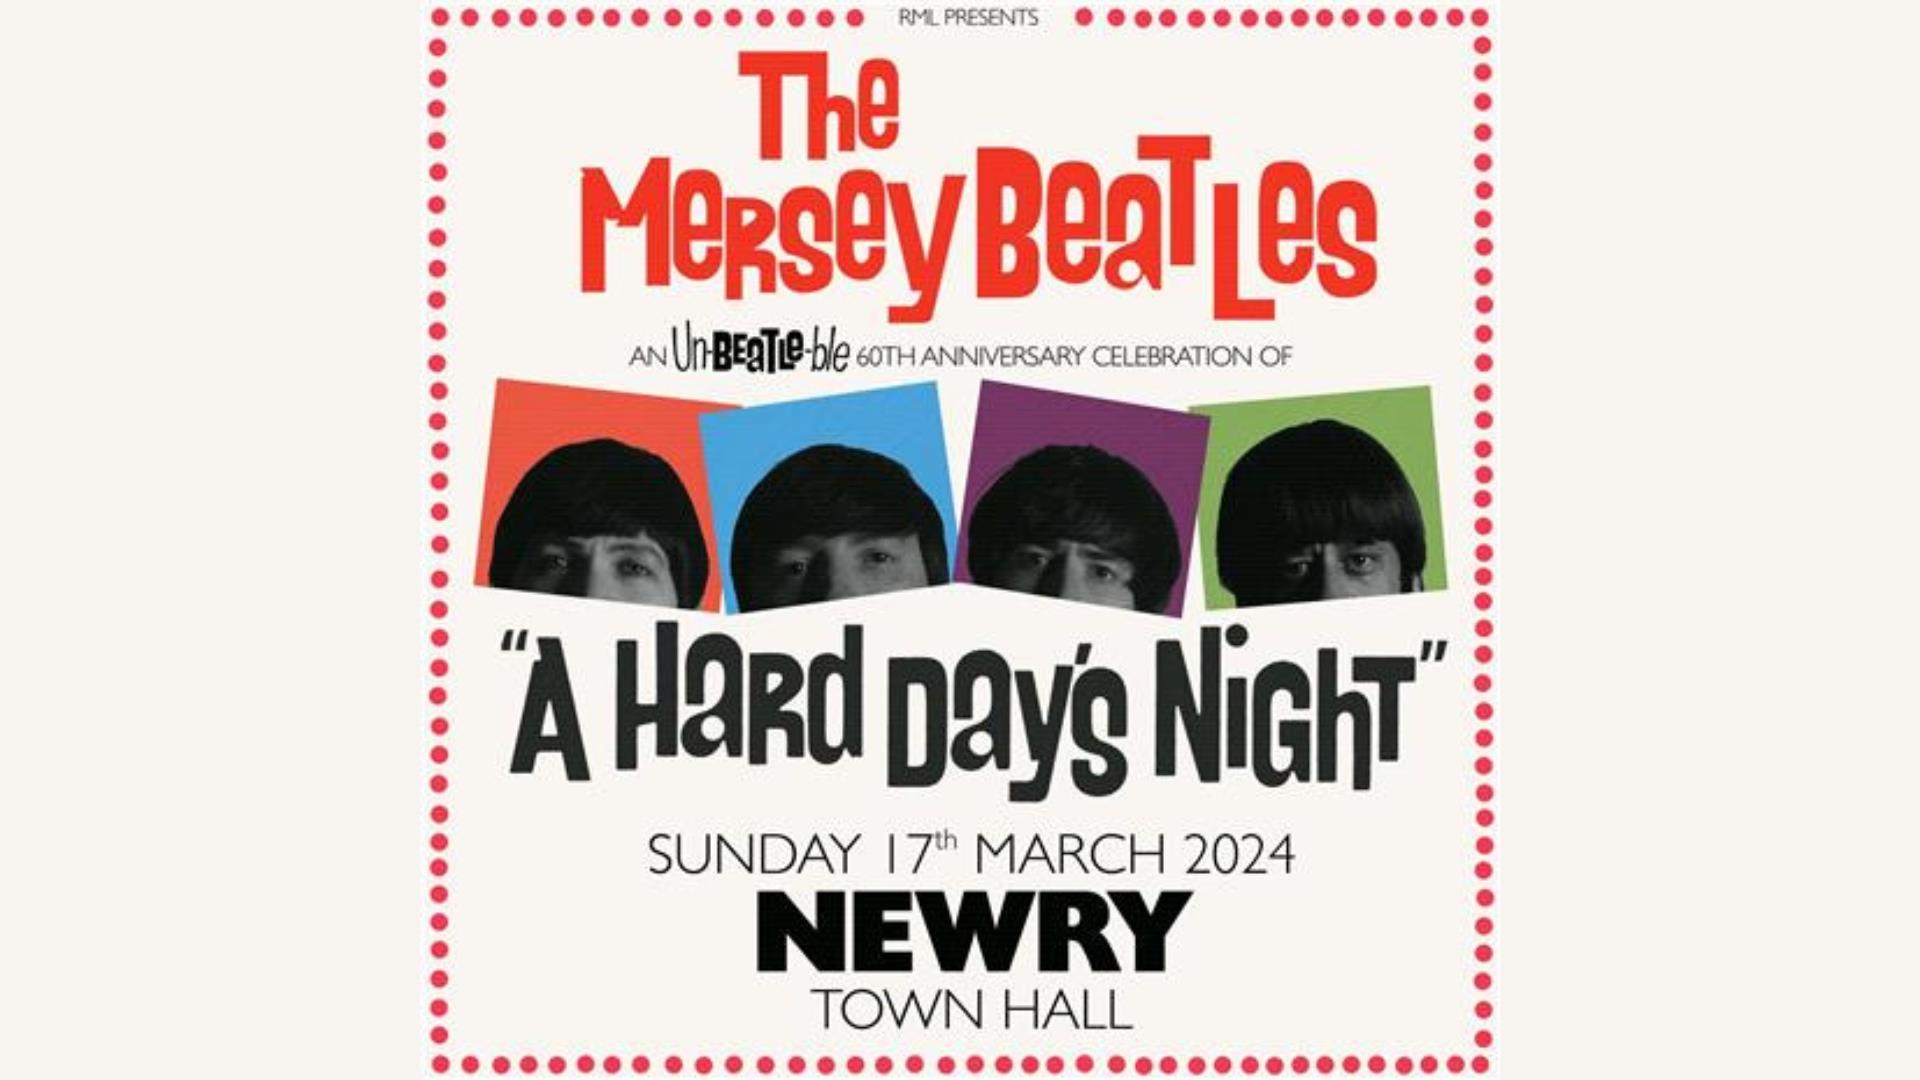 Mersey Beatles at Newry Town Hall